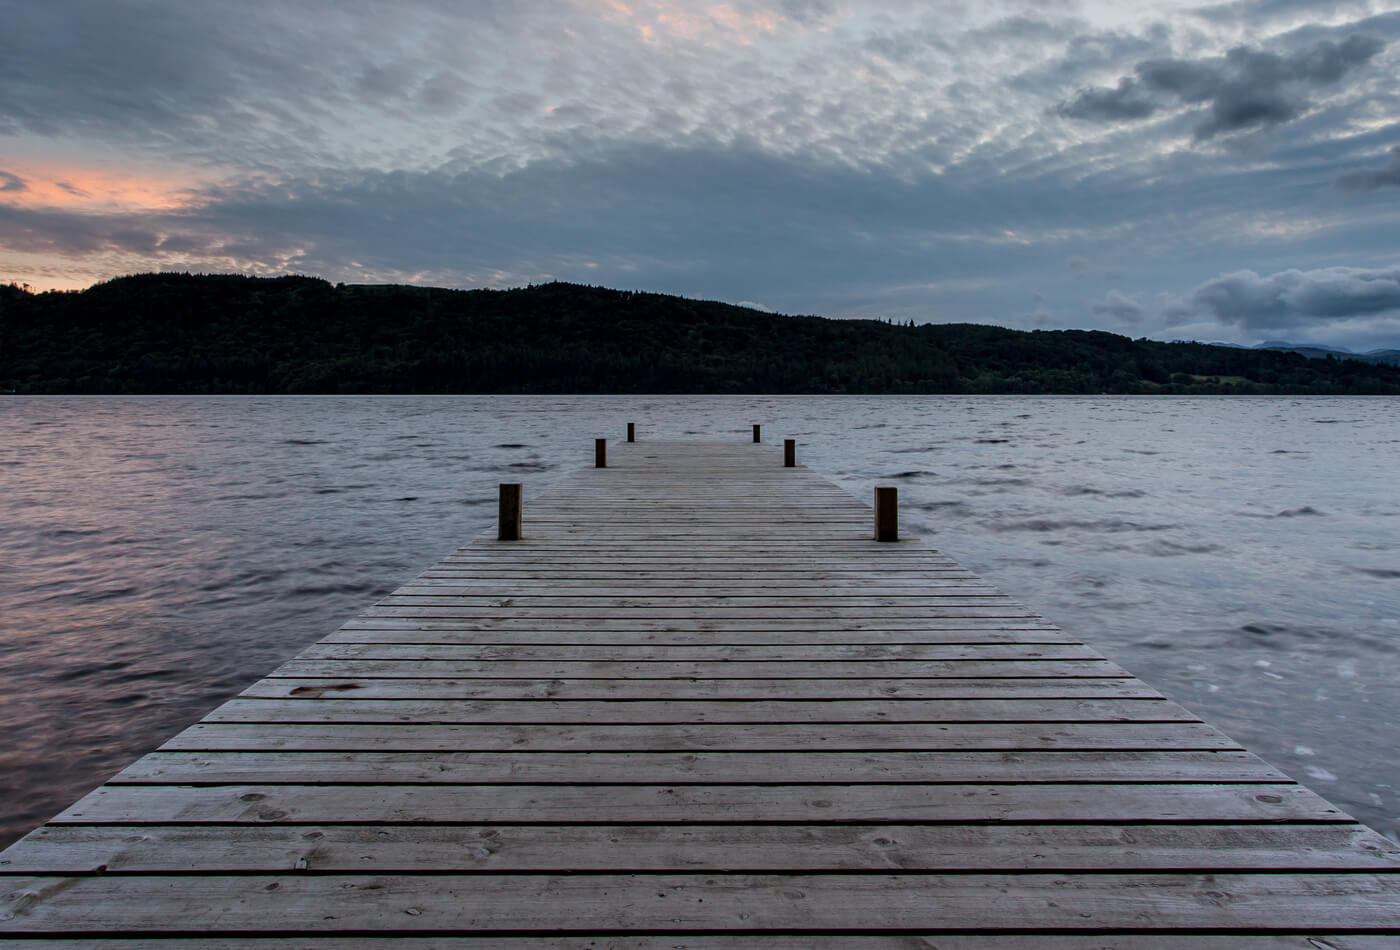 A view across Lake Windermere from a wooden jetty